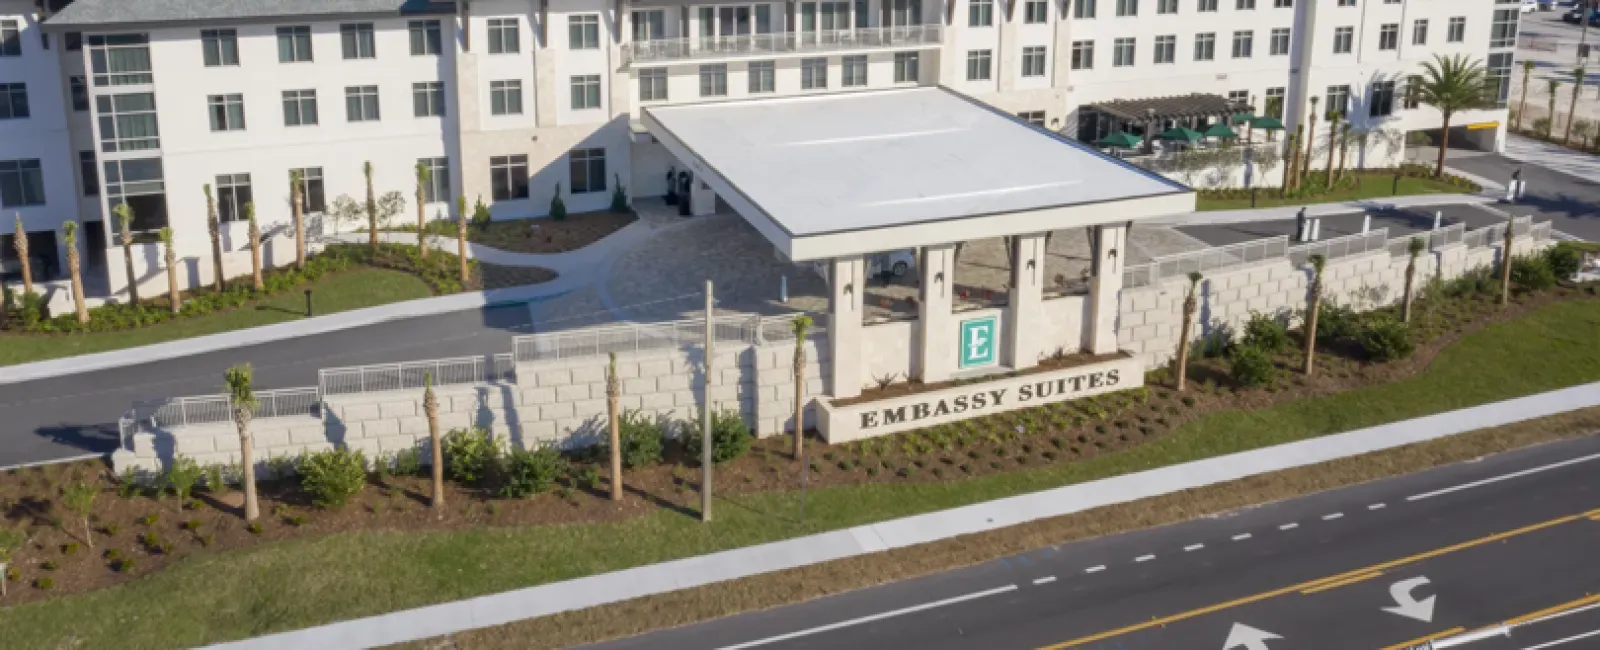 Embassy Suites St. Augustine Wins Readers' Choice